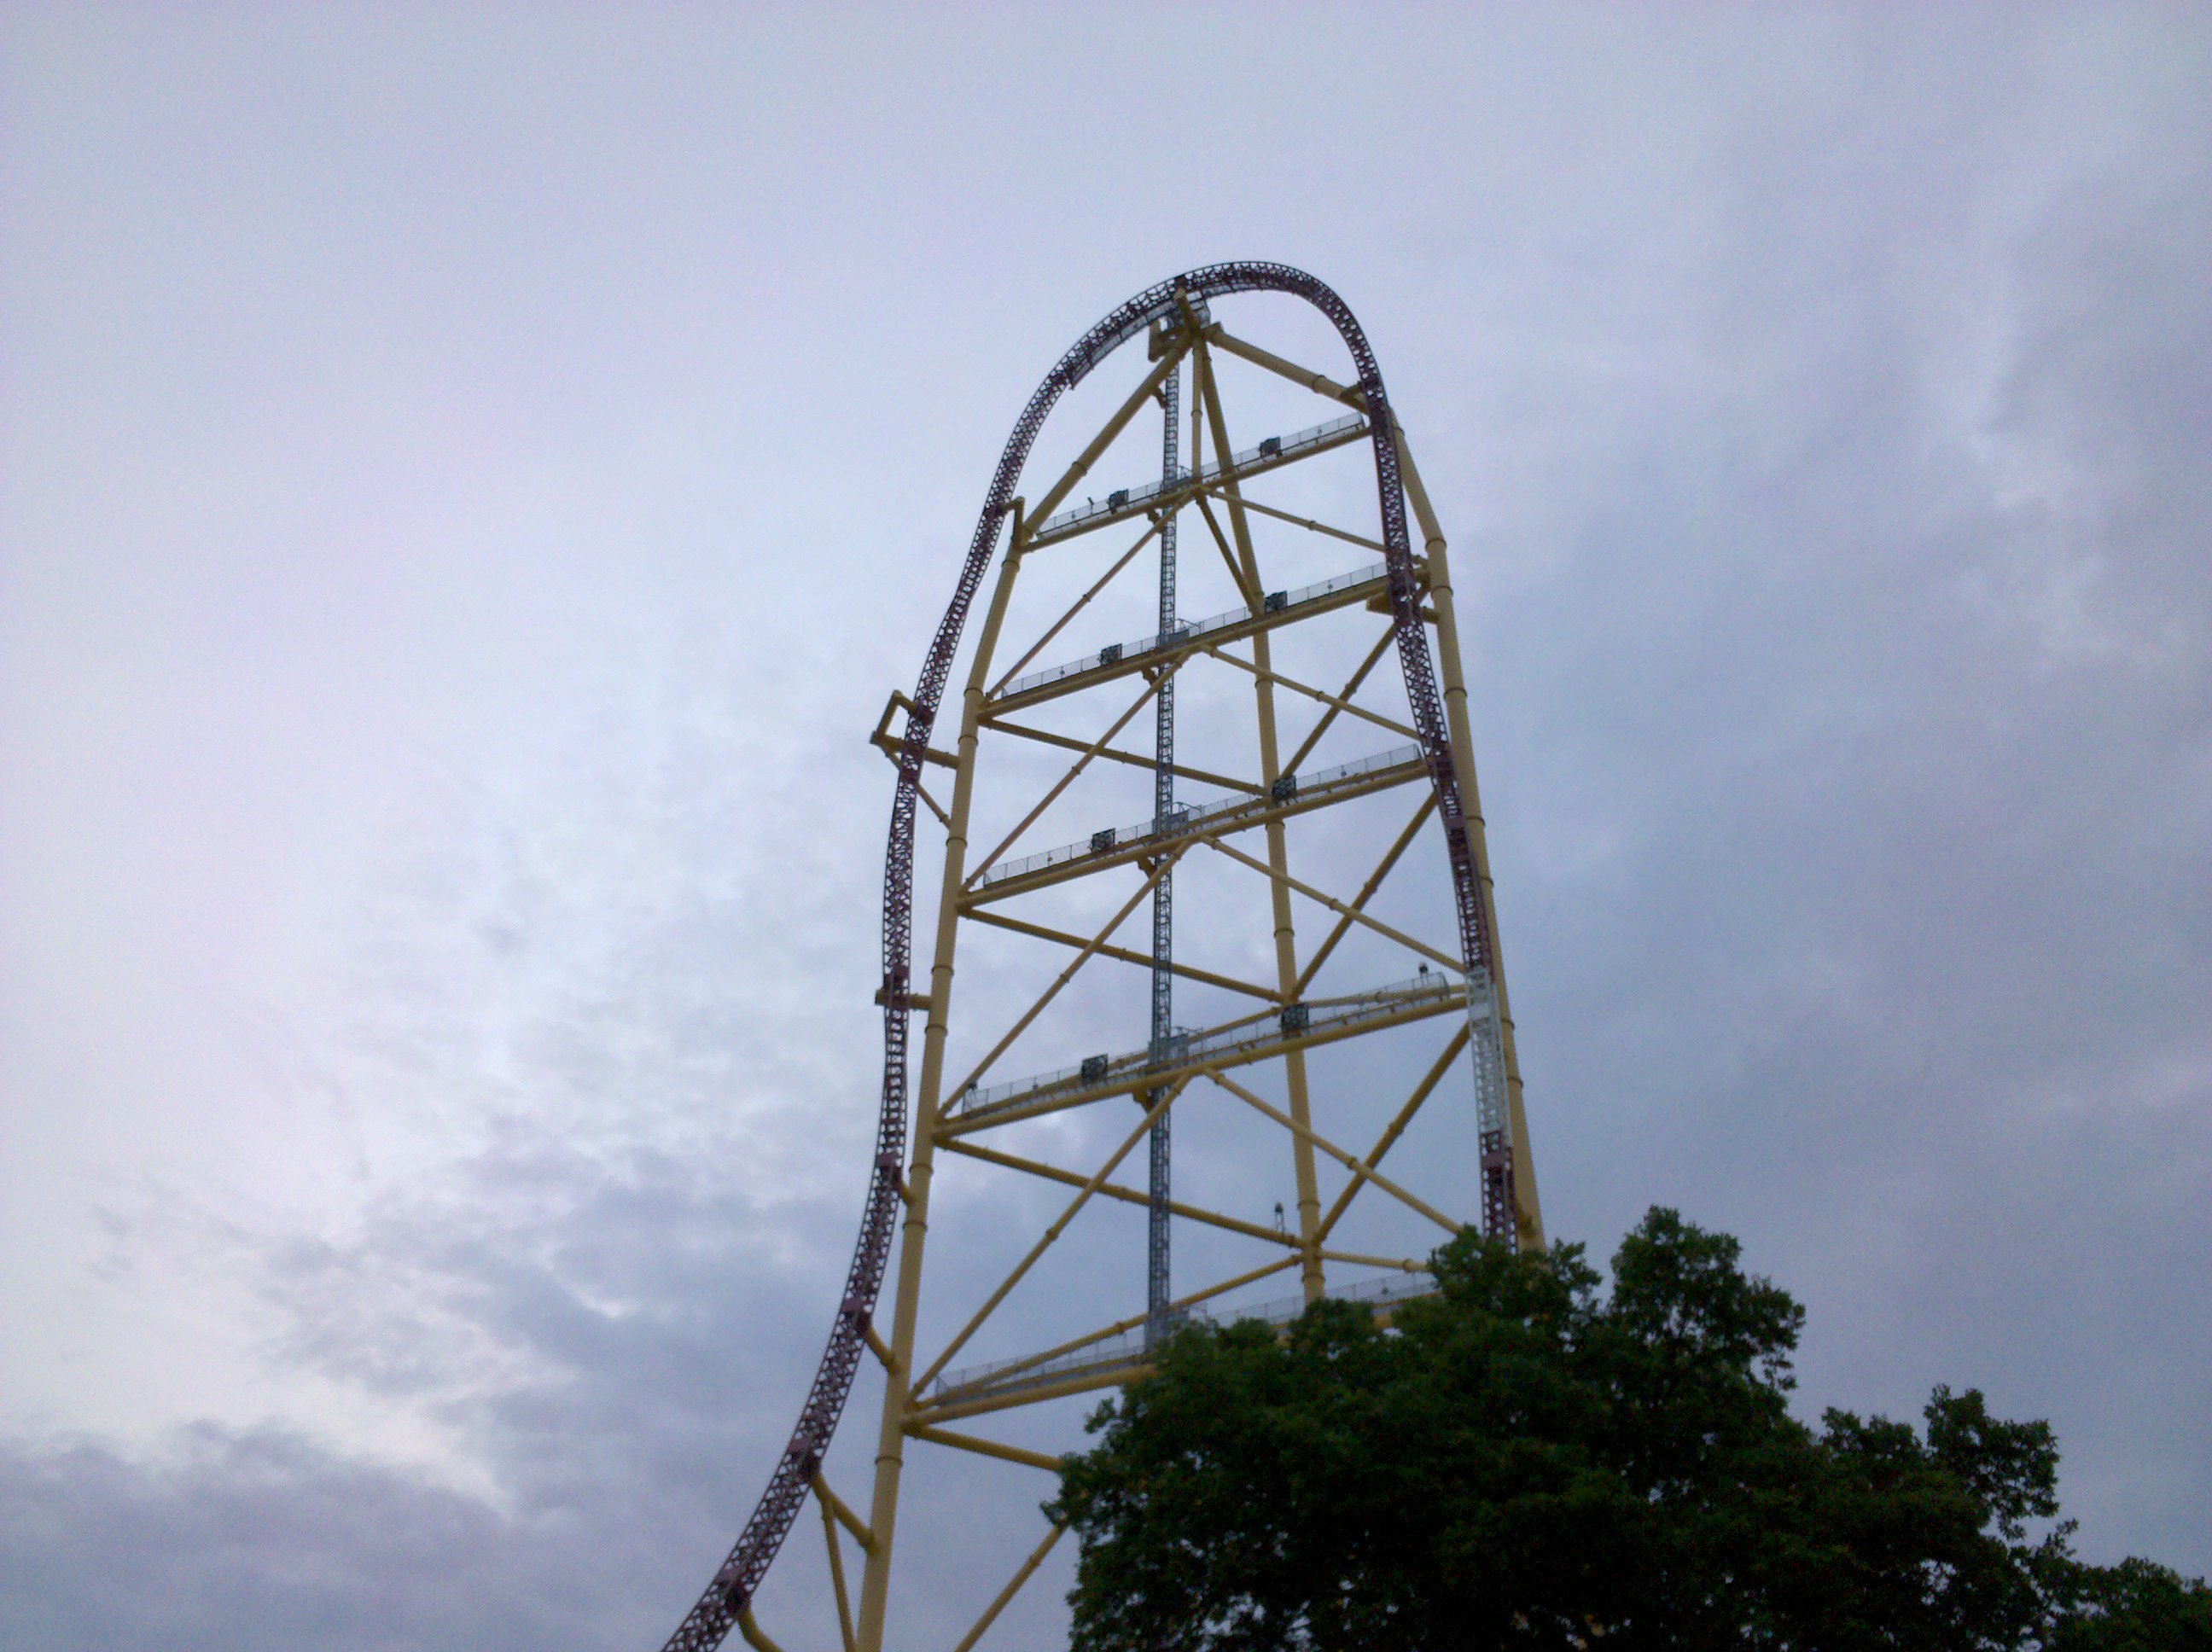 Cedar Point ride closed after launch cable detaches